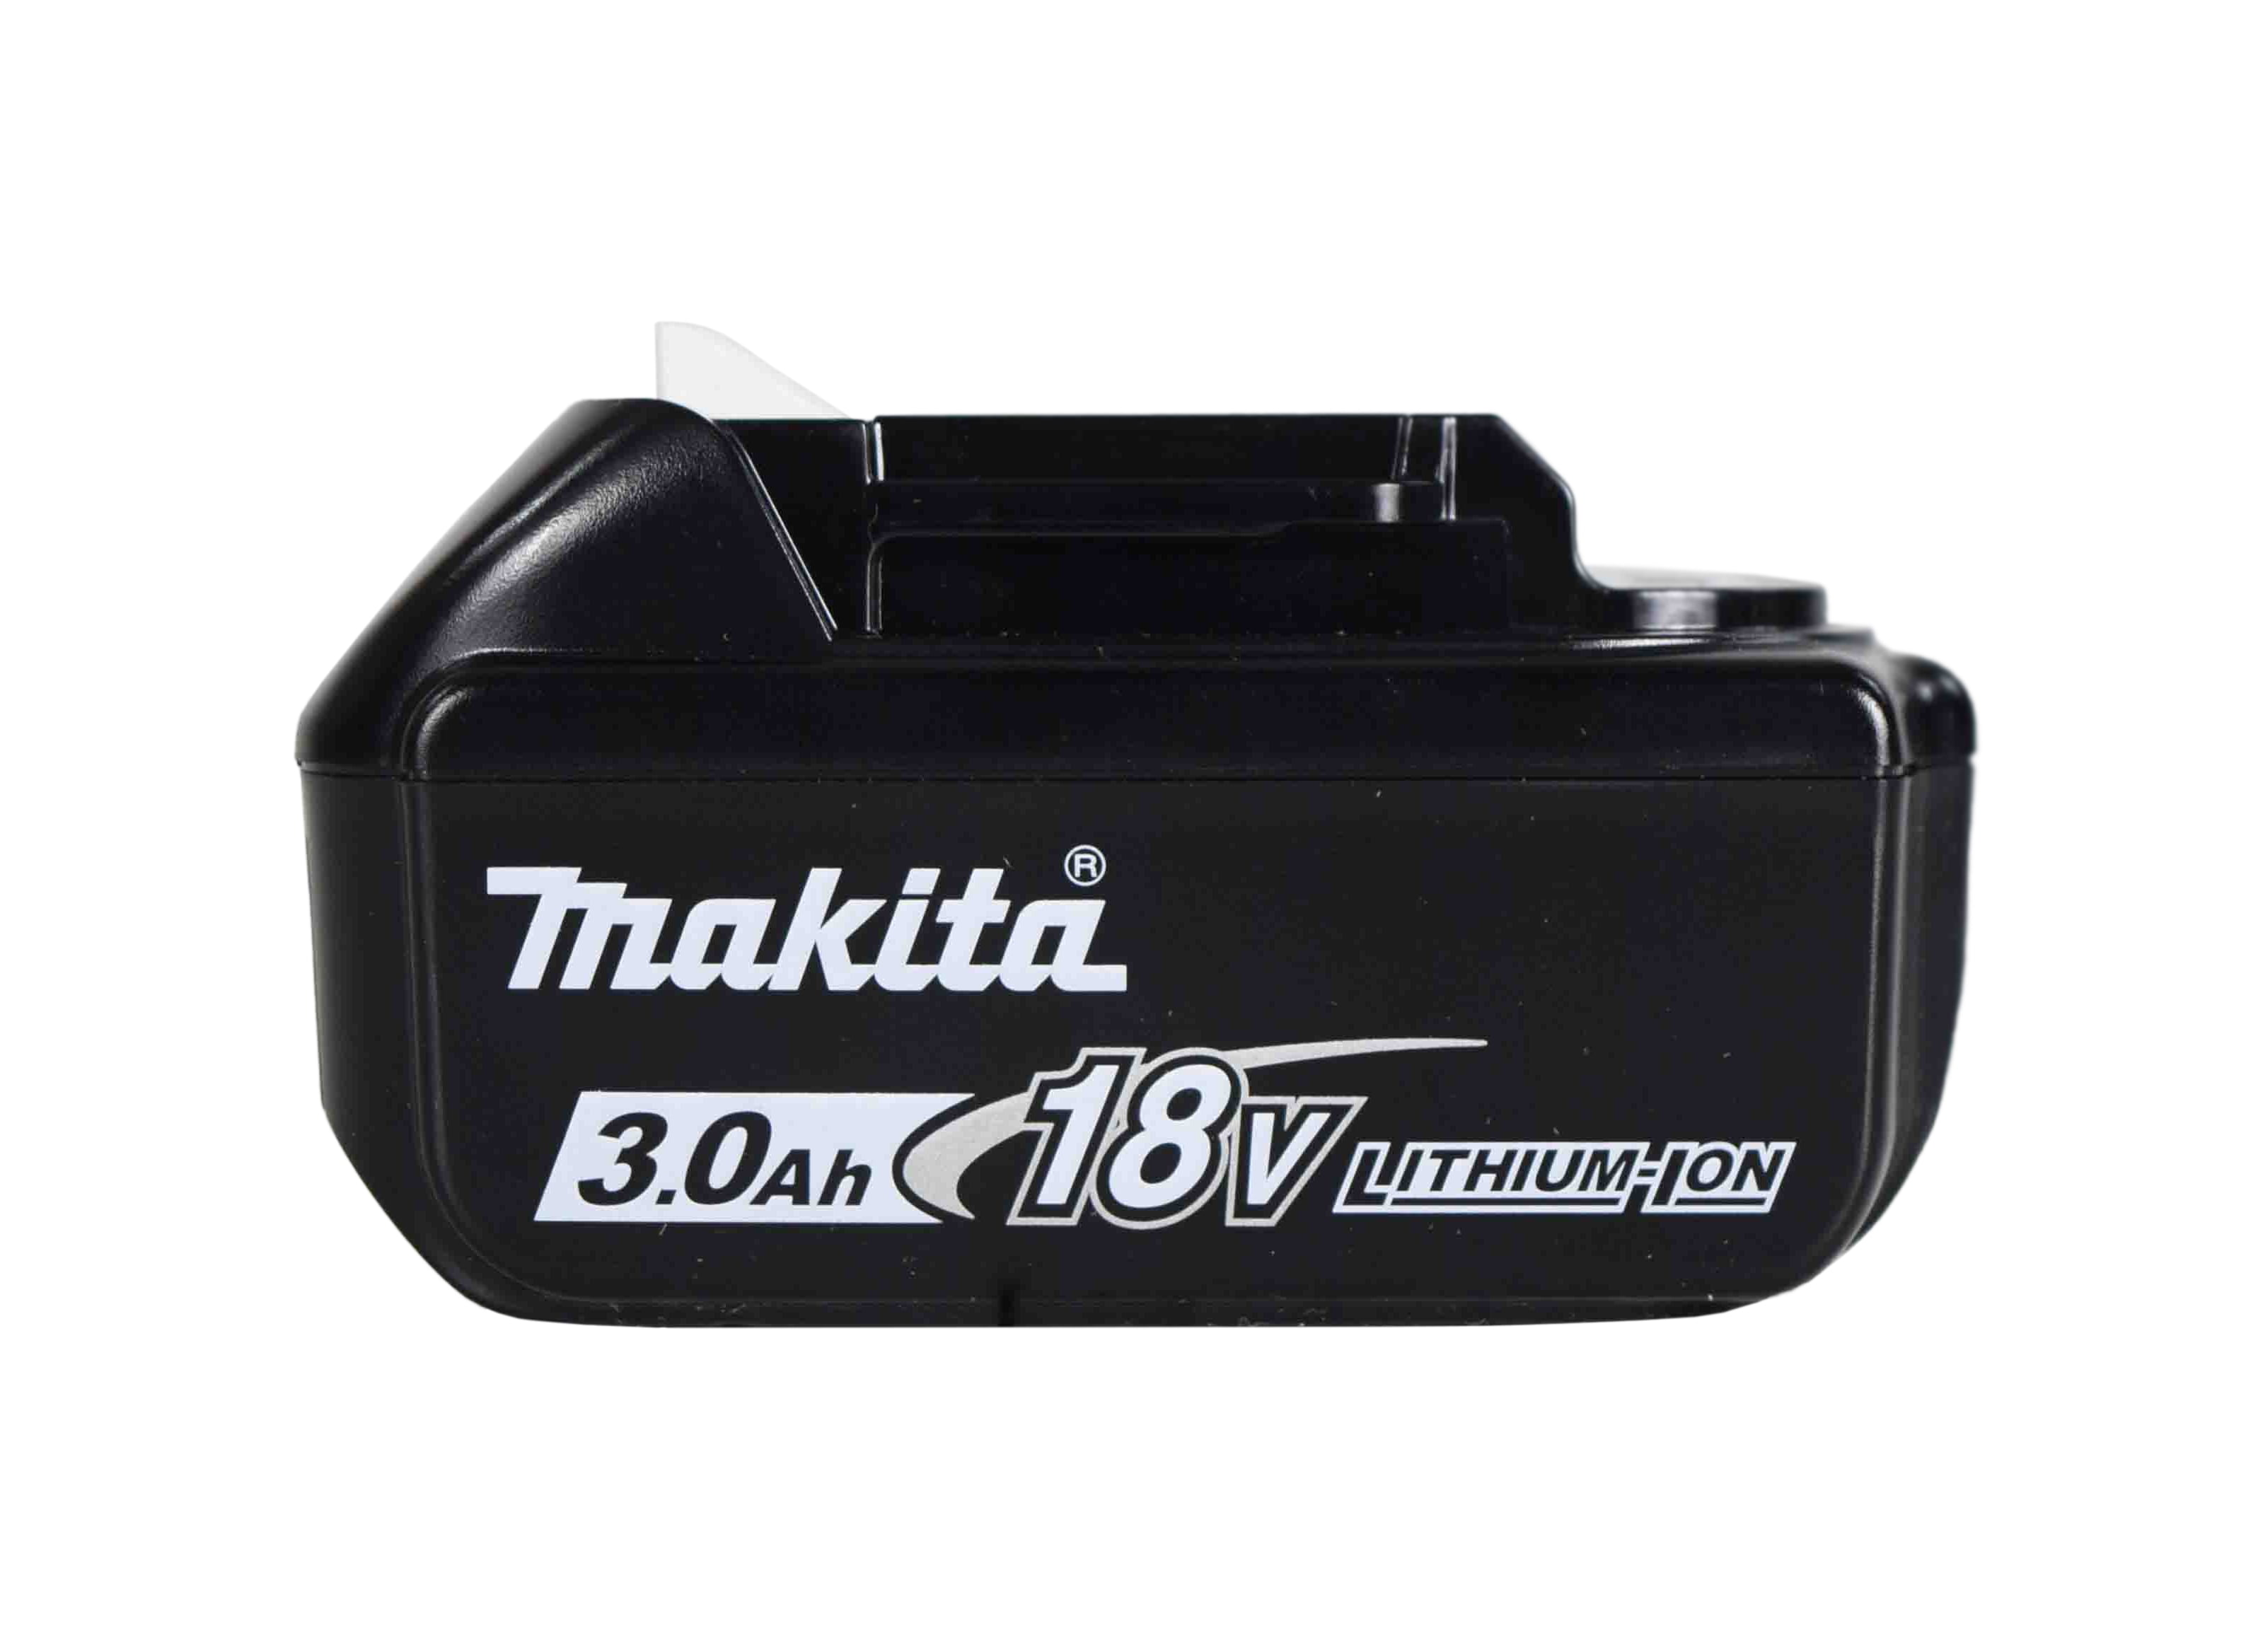 Makita 18V Lithium-Ion Battery Packs 3.0Ah with Fuel Gauge BL1830B - pack -